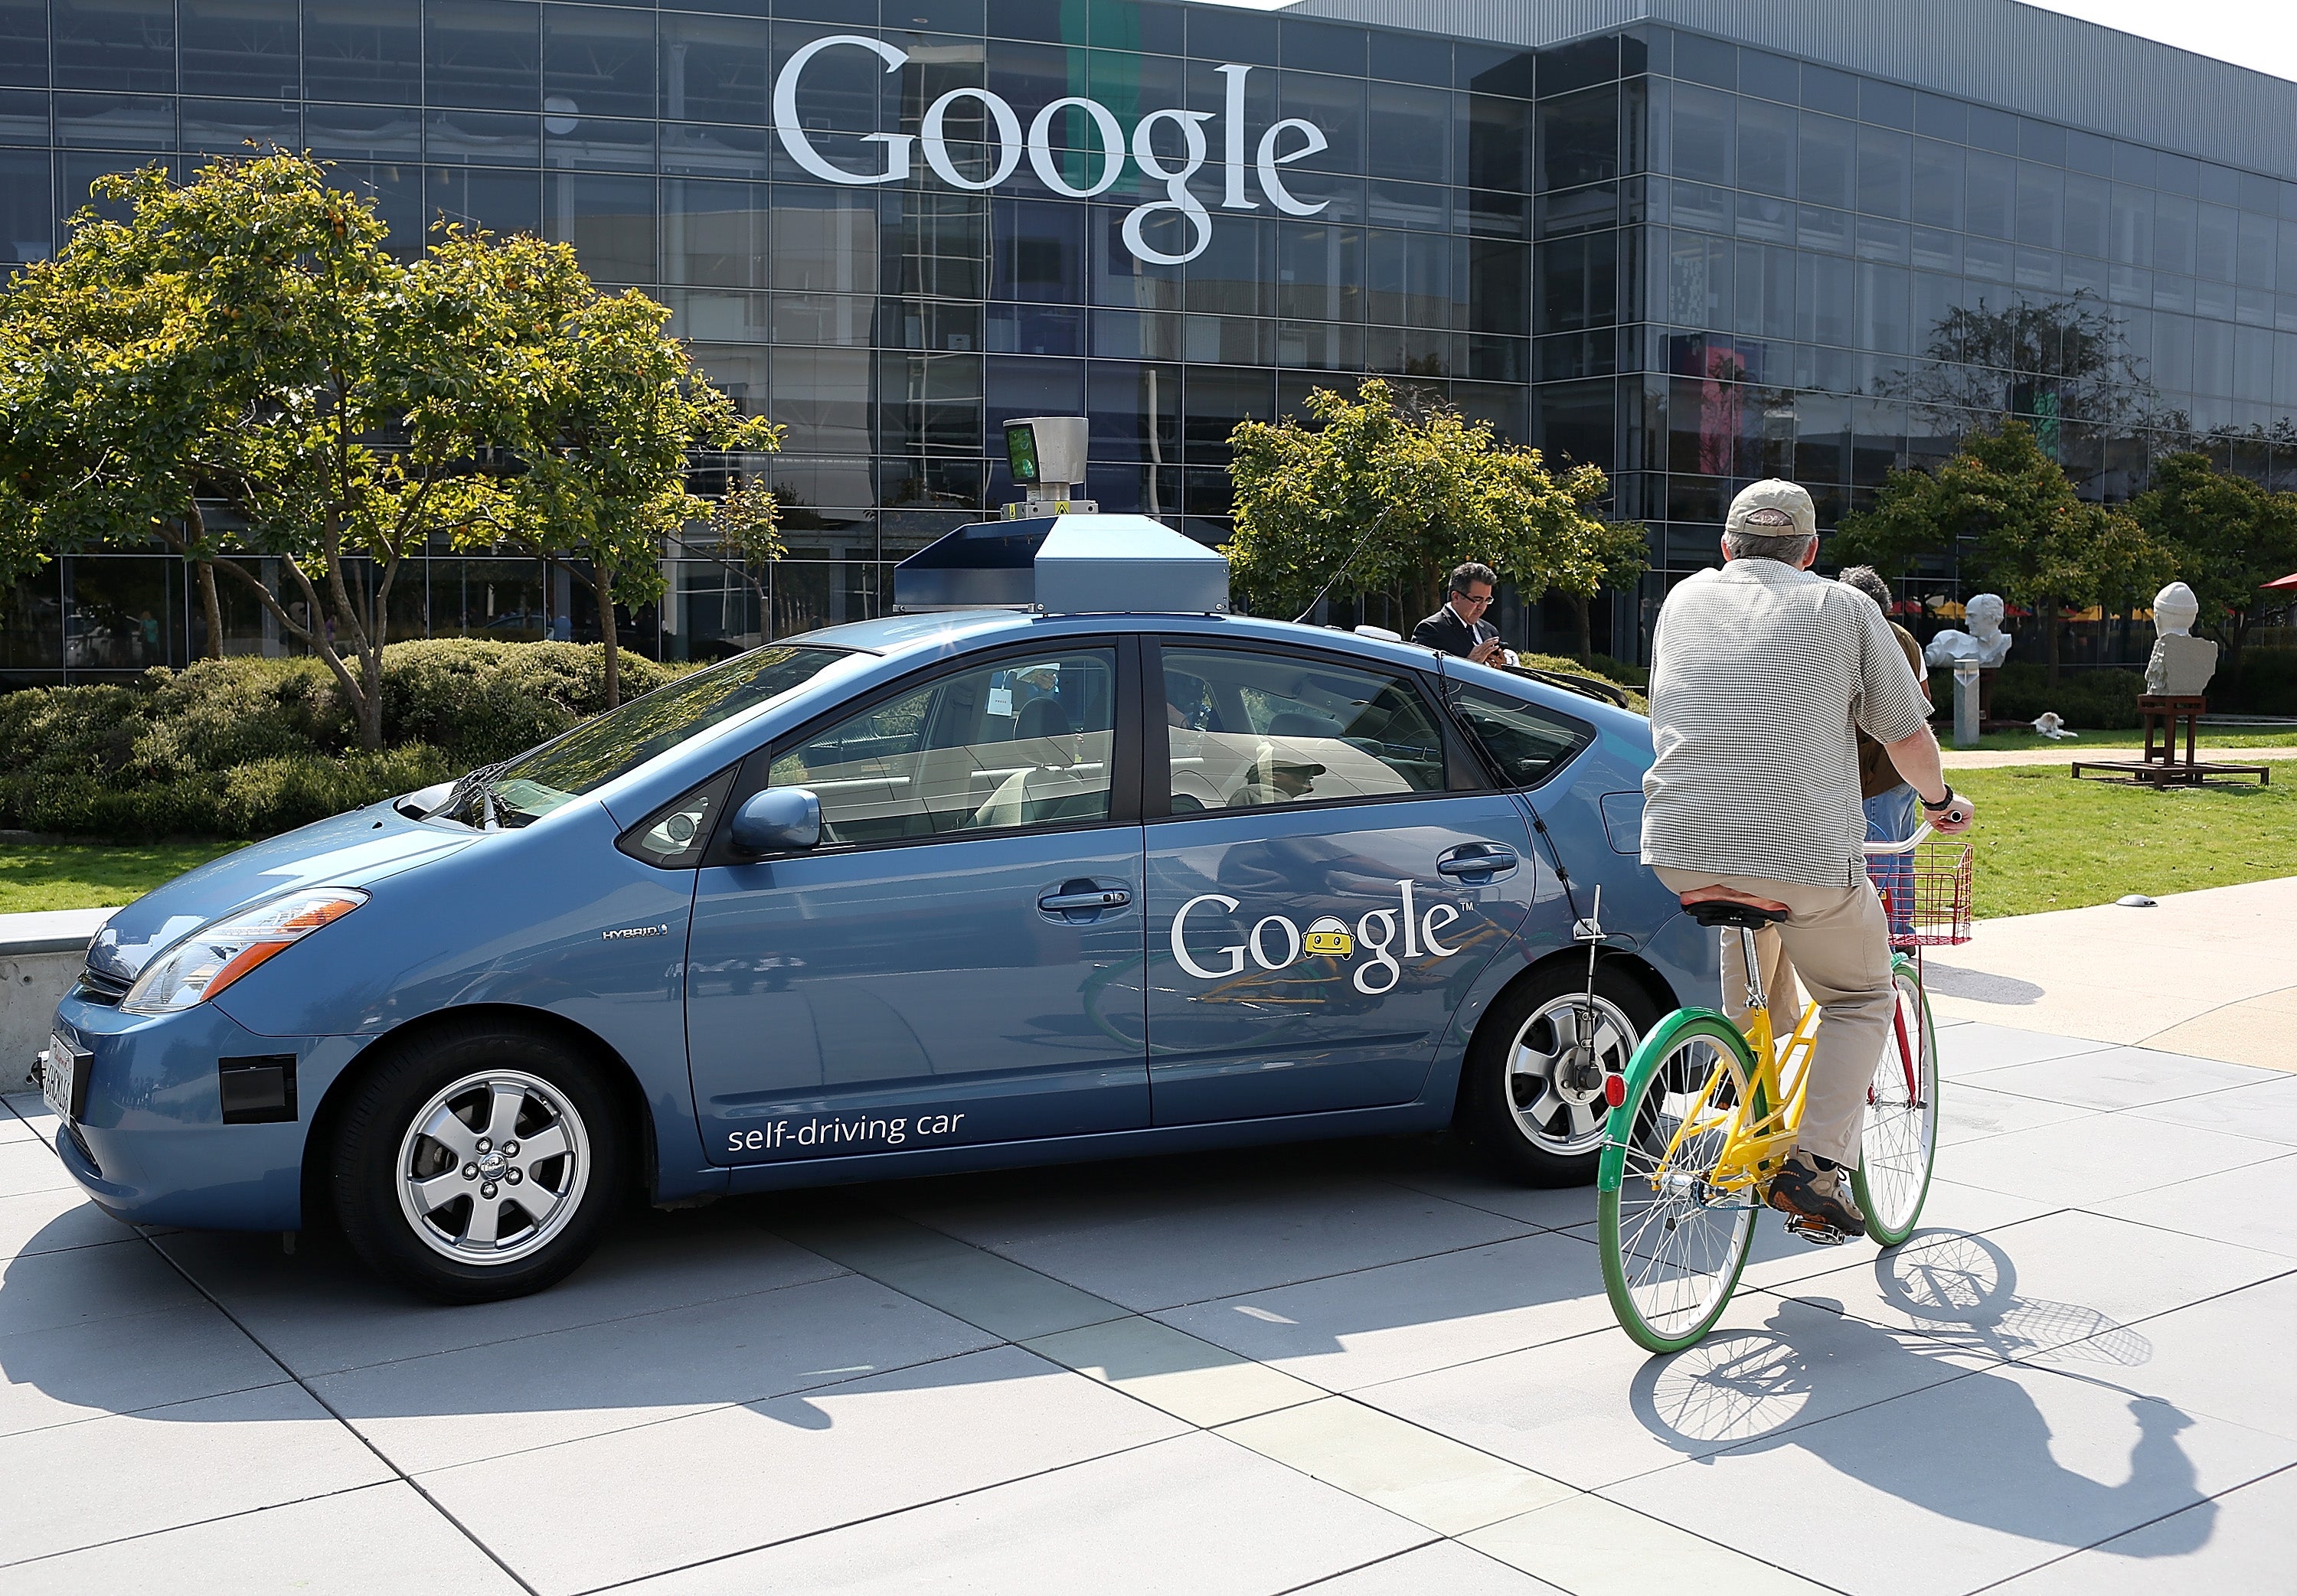 A bicyclist rides by a Google self-driving car at the Google headquarters on September 25, 2012 in Mountain View, California. California Gov. Jerry Brown signed State Senate Bill 1298 that allows driverless cars to operate on public roads for testing pur